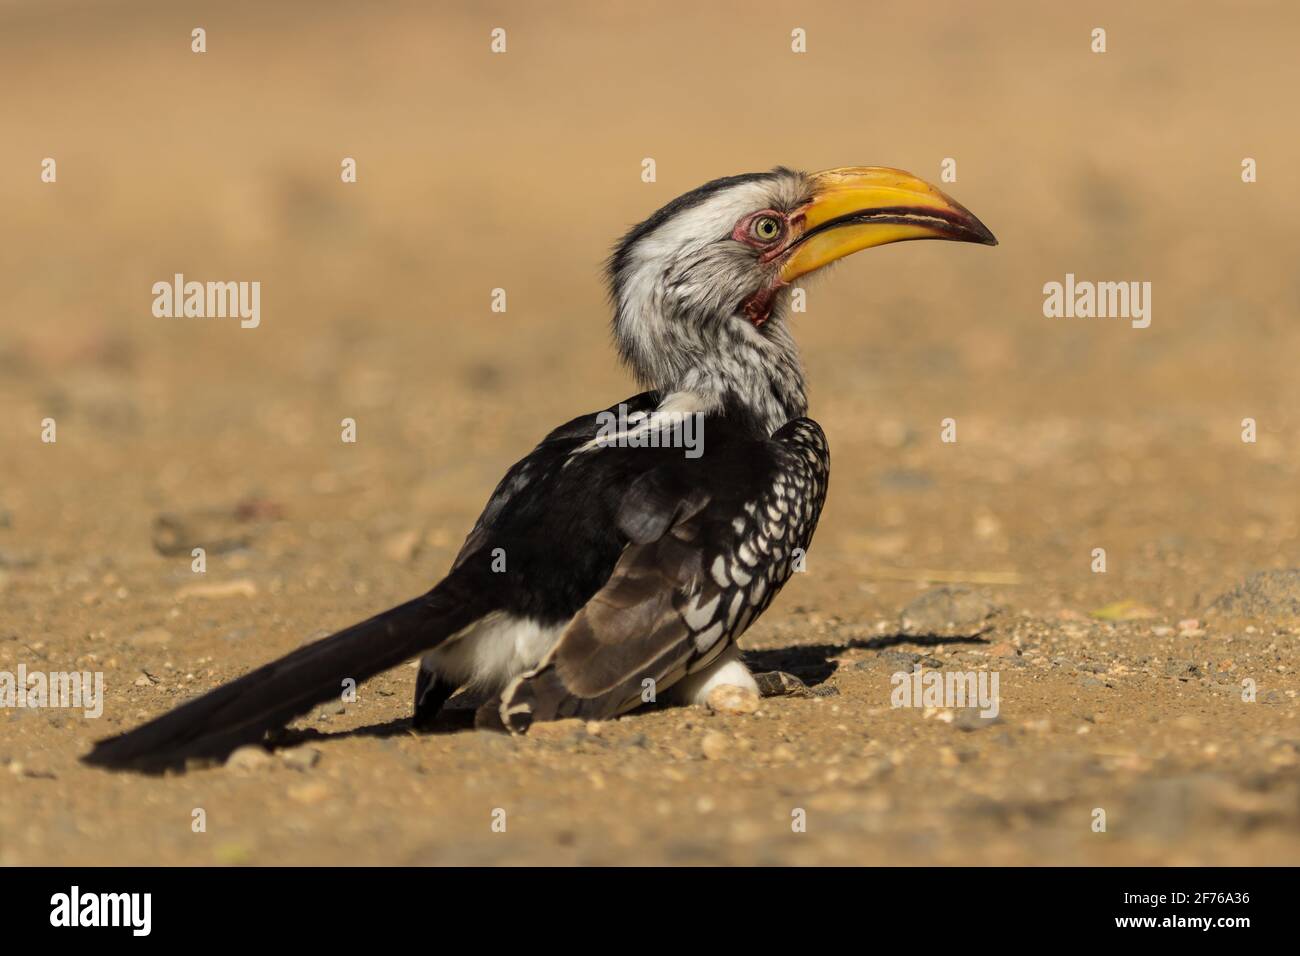 A low angle photo of a Southern Yellow-billed Hornbill sitting on the ground, Kruger National Park Stock Photo